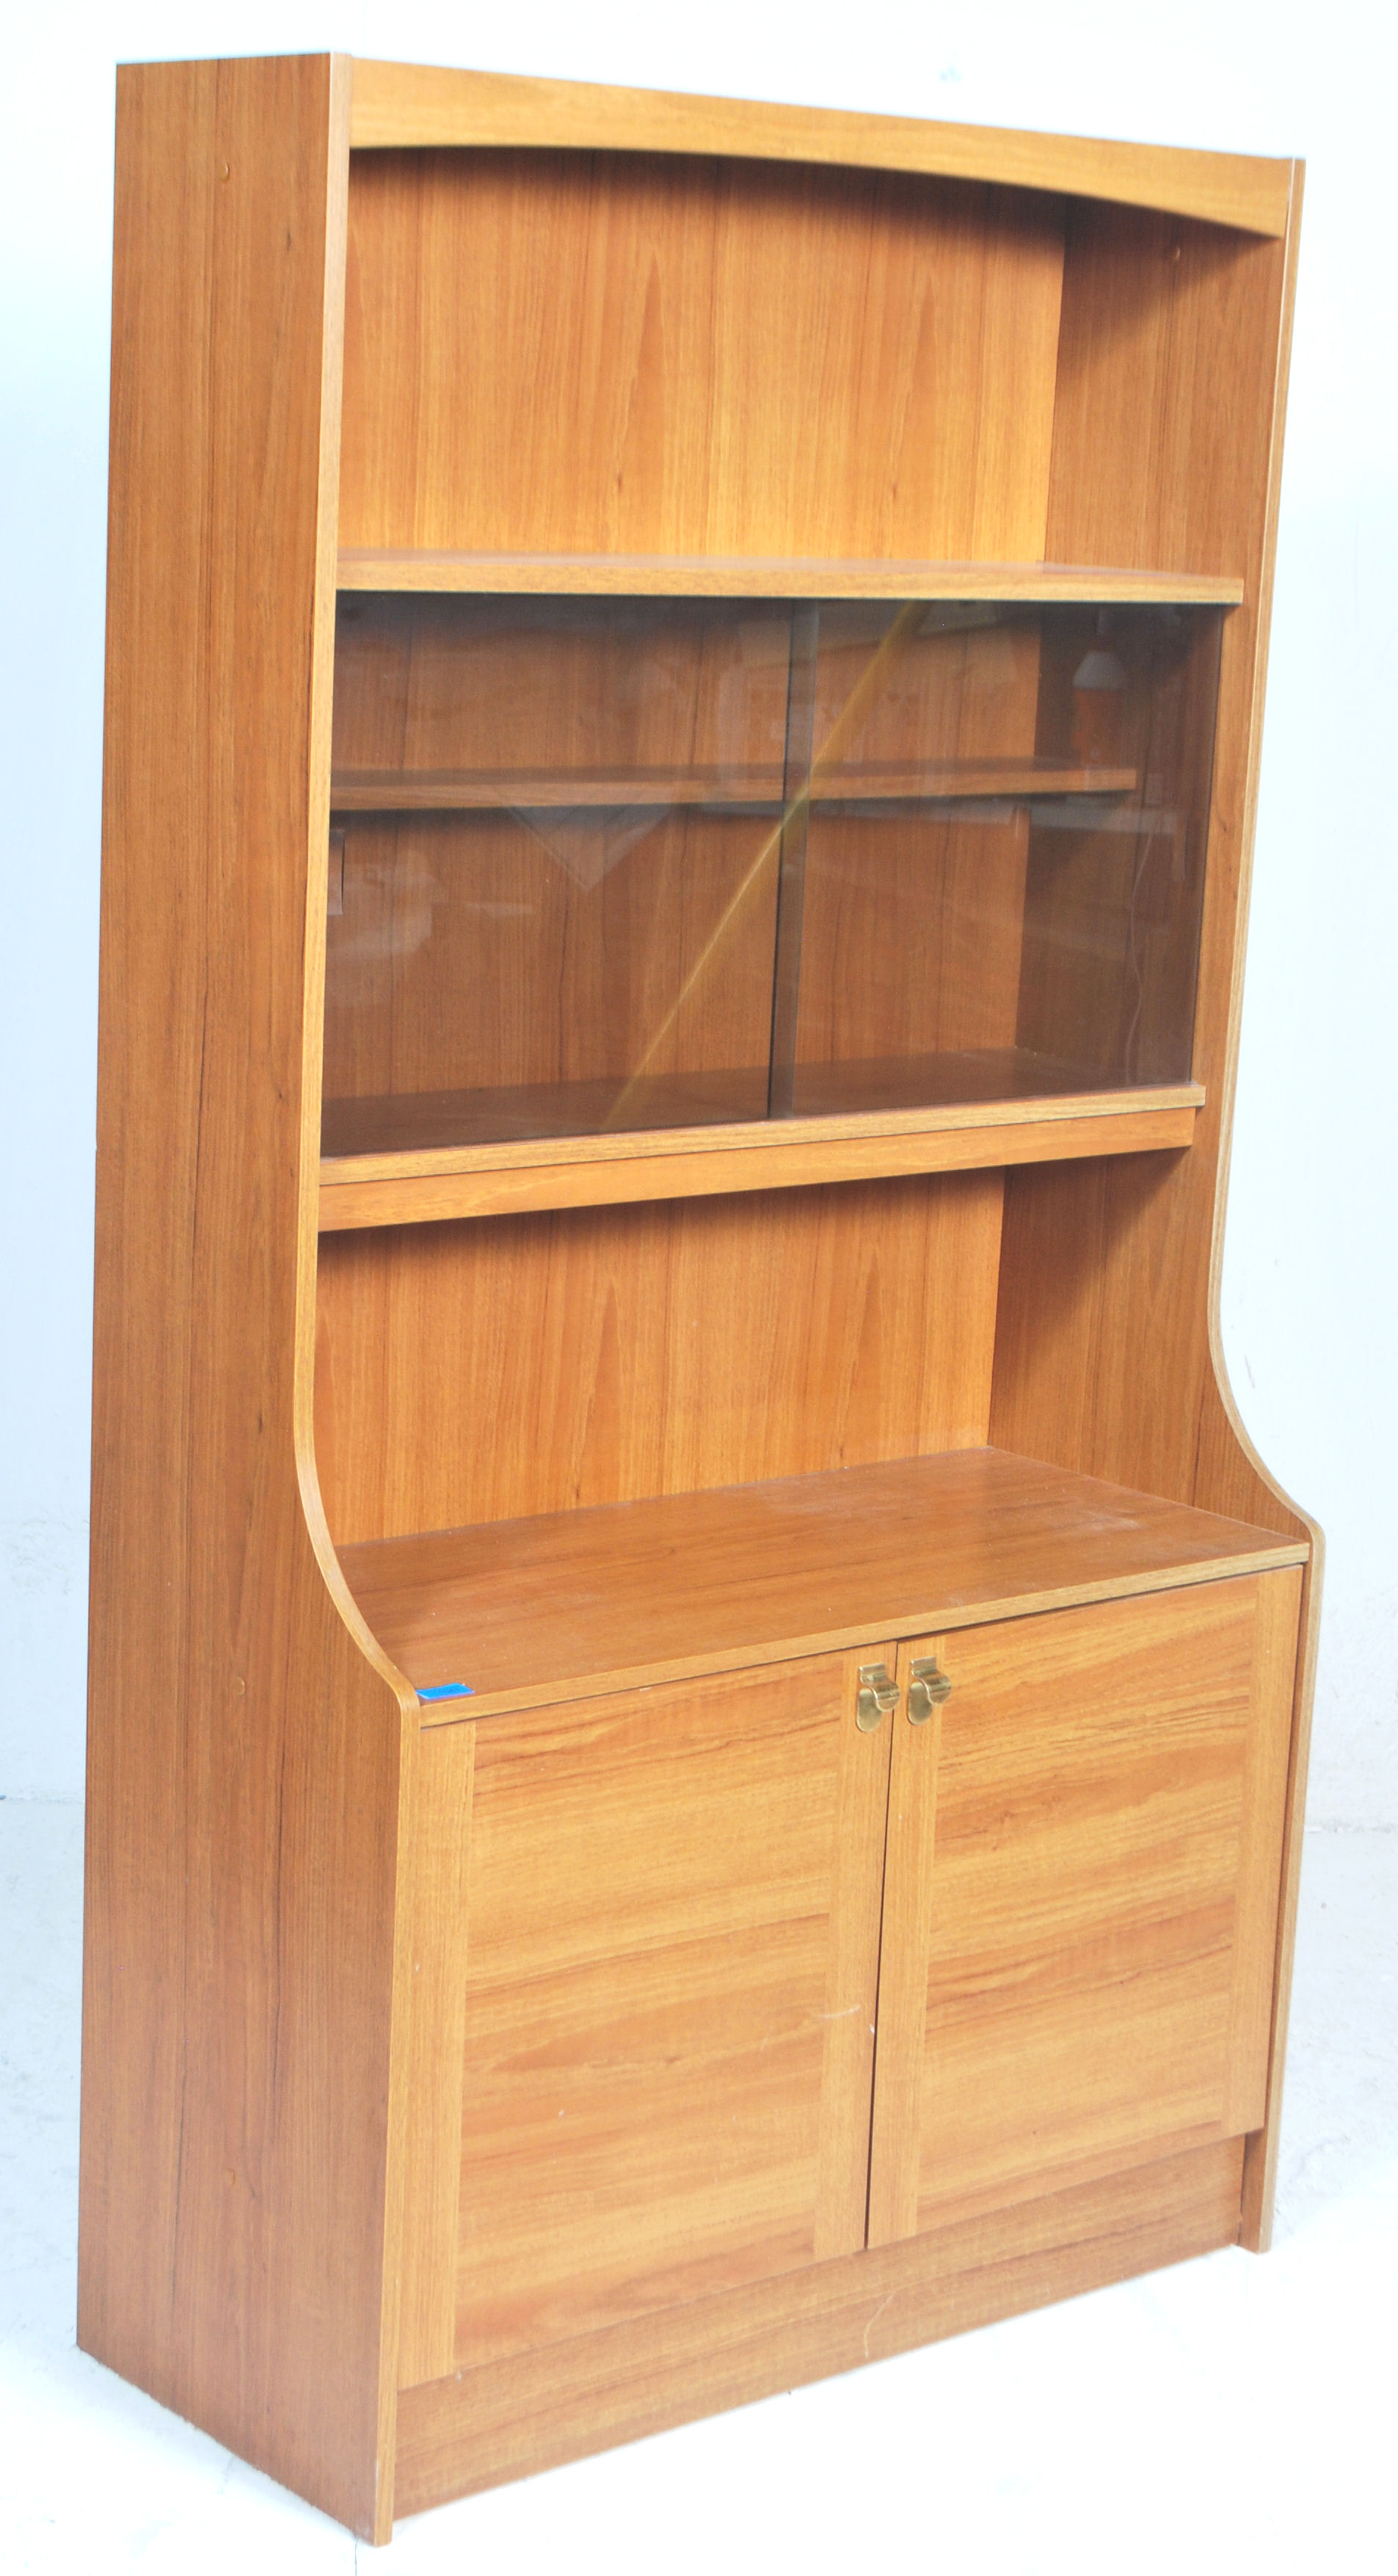 A retro 20th century teak wood veneer  room divider - bookcase cabinet. The upright body with